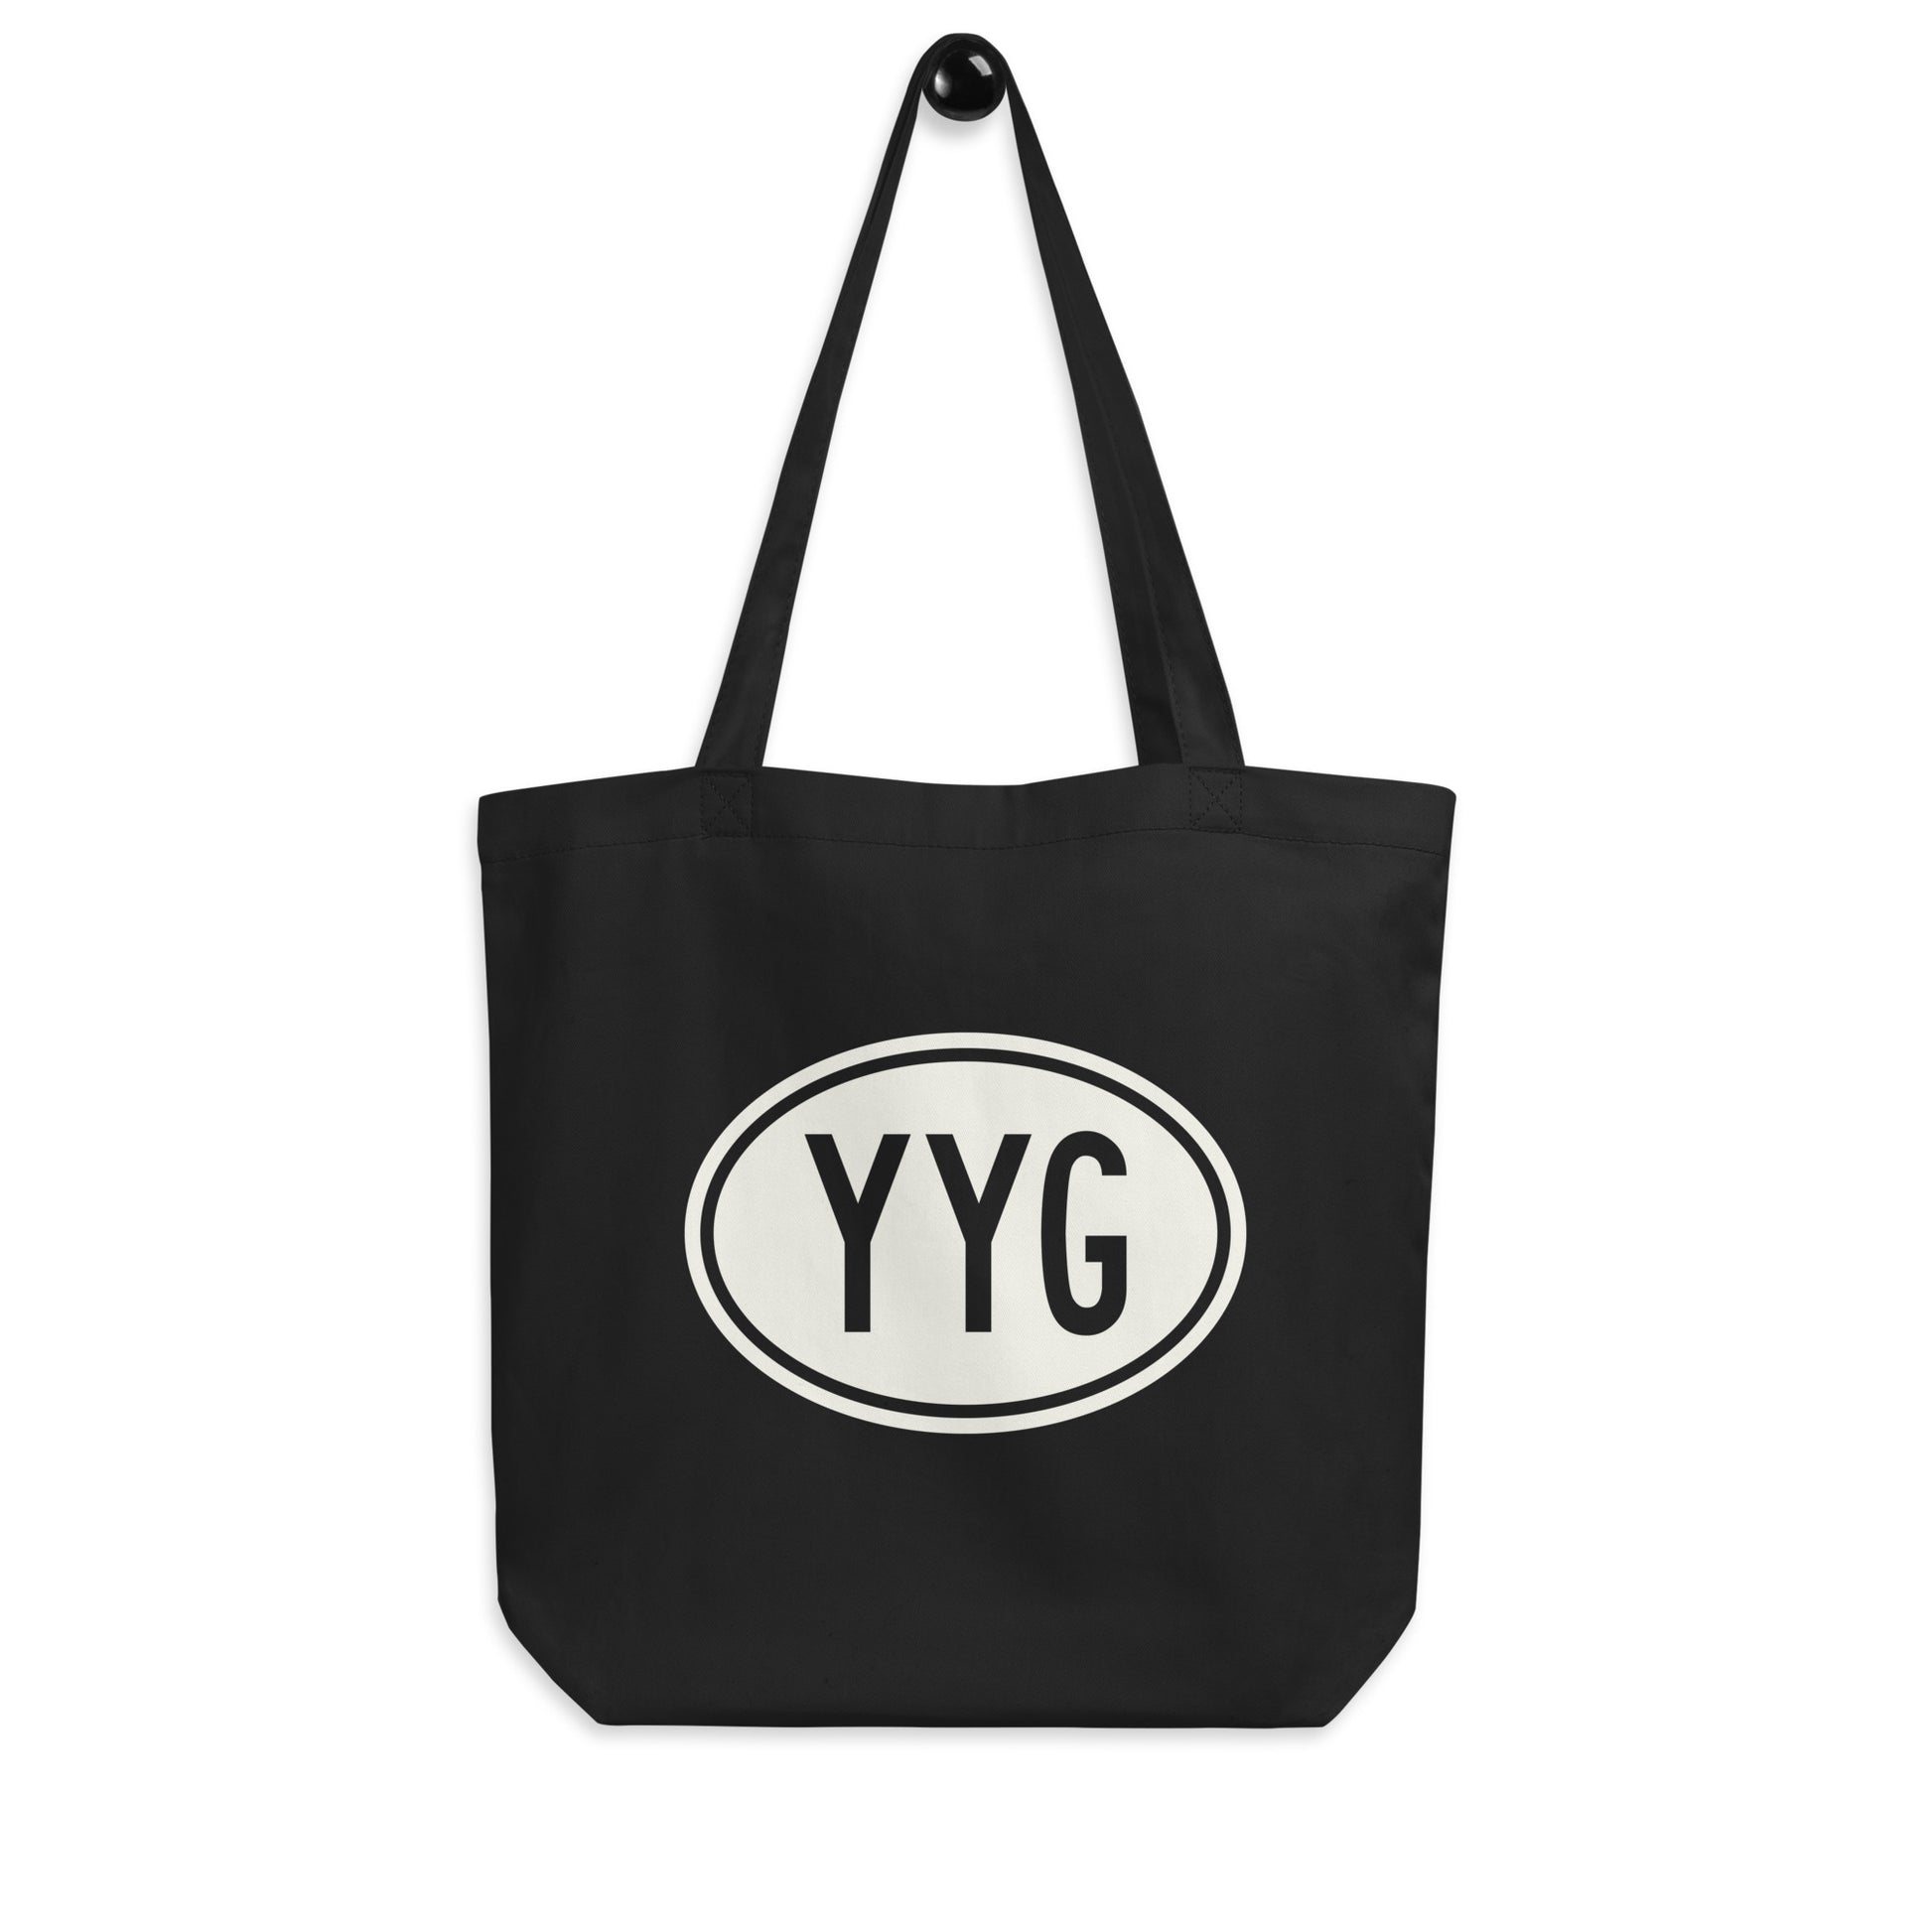 Unique Travel Gift Organic Tote - White Oval • YYG Charlottetown • YHM Designs - Image 04